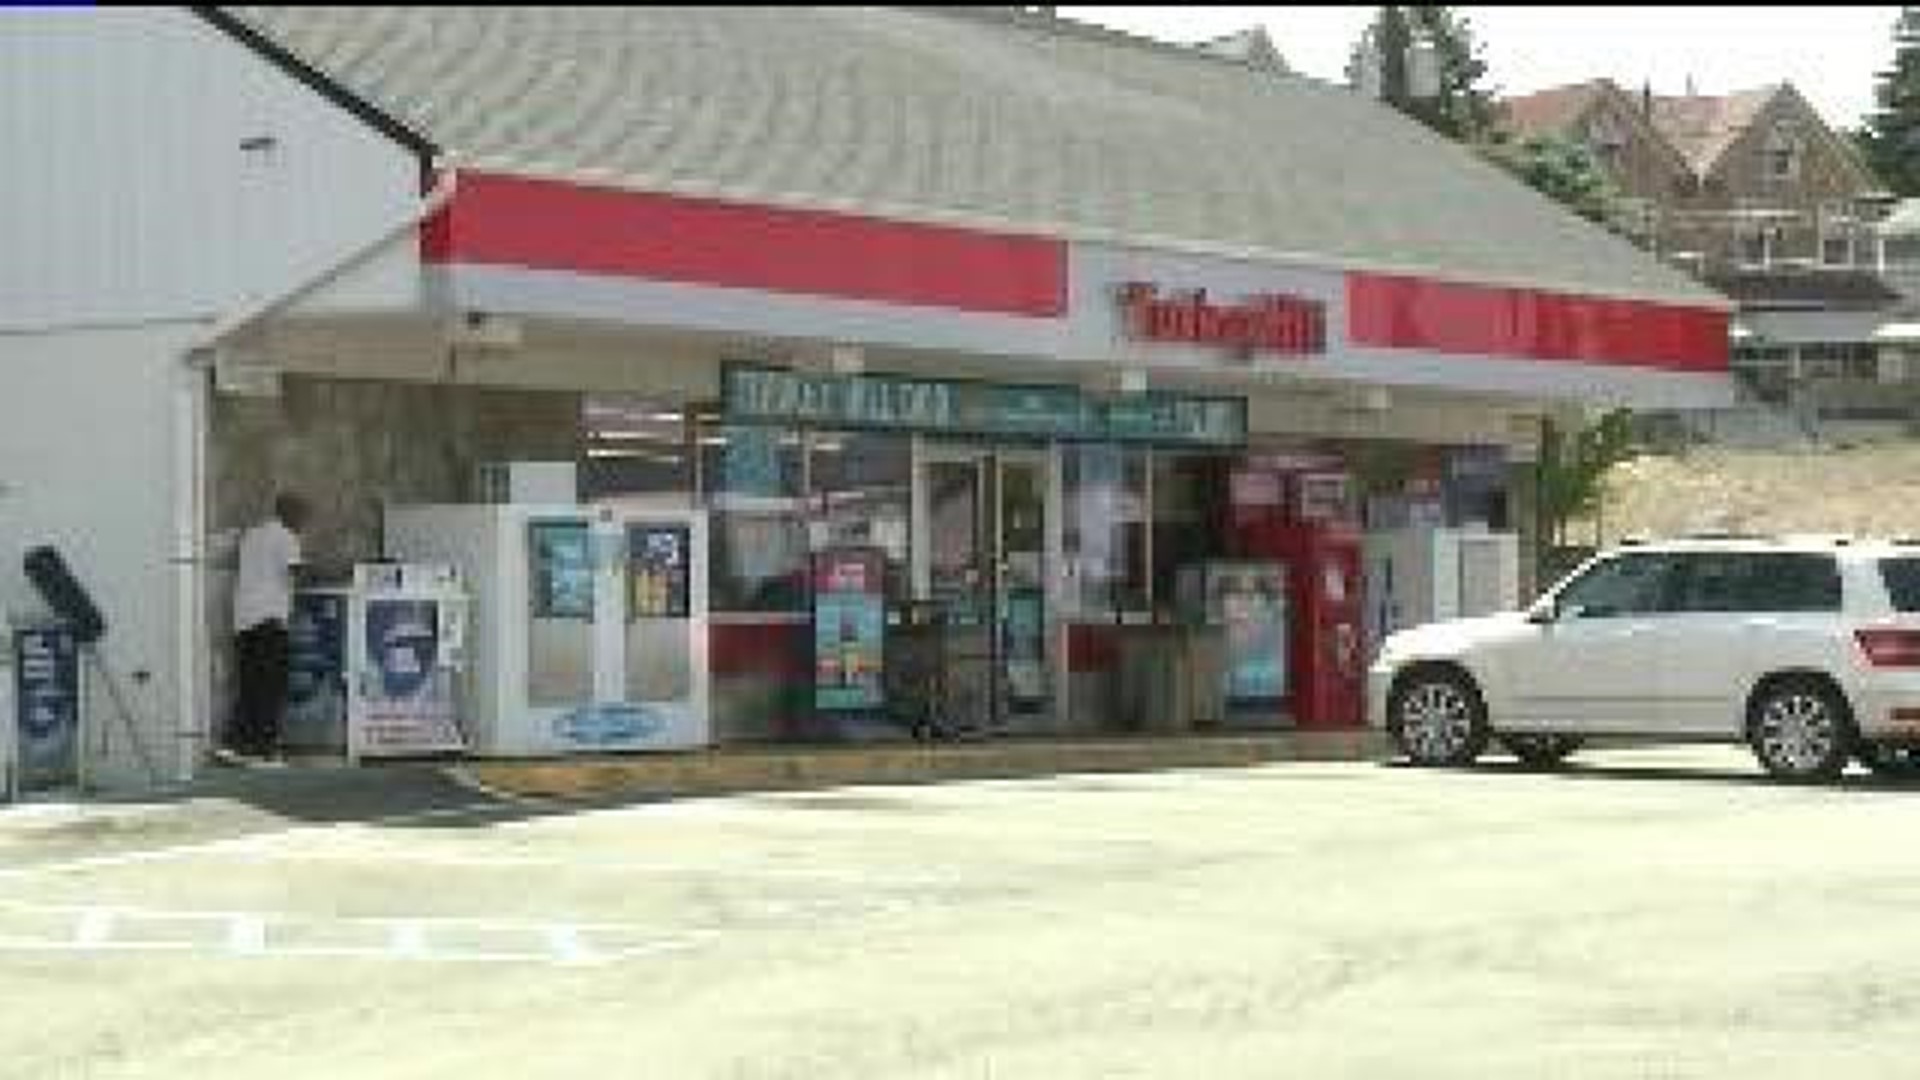 Robber With Knife Hit Wilkes-Barre Store